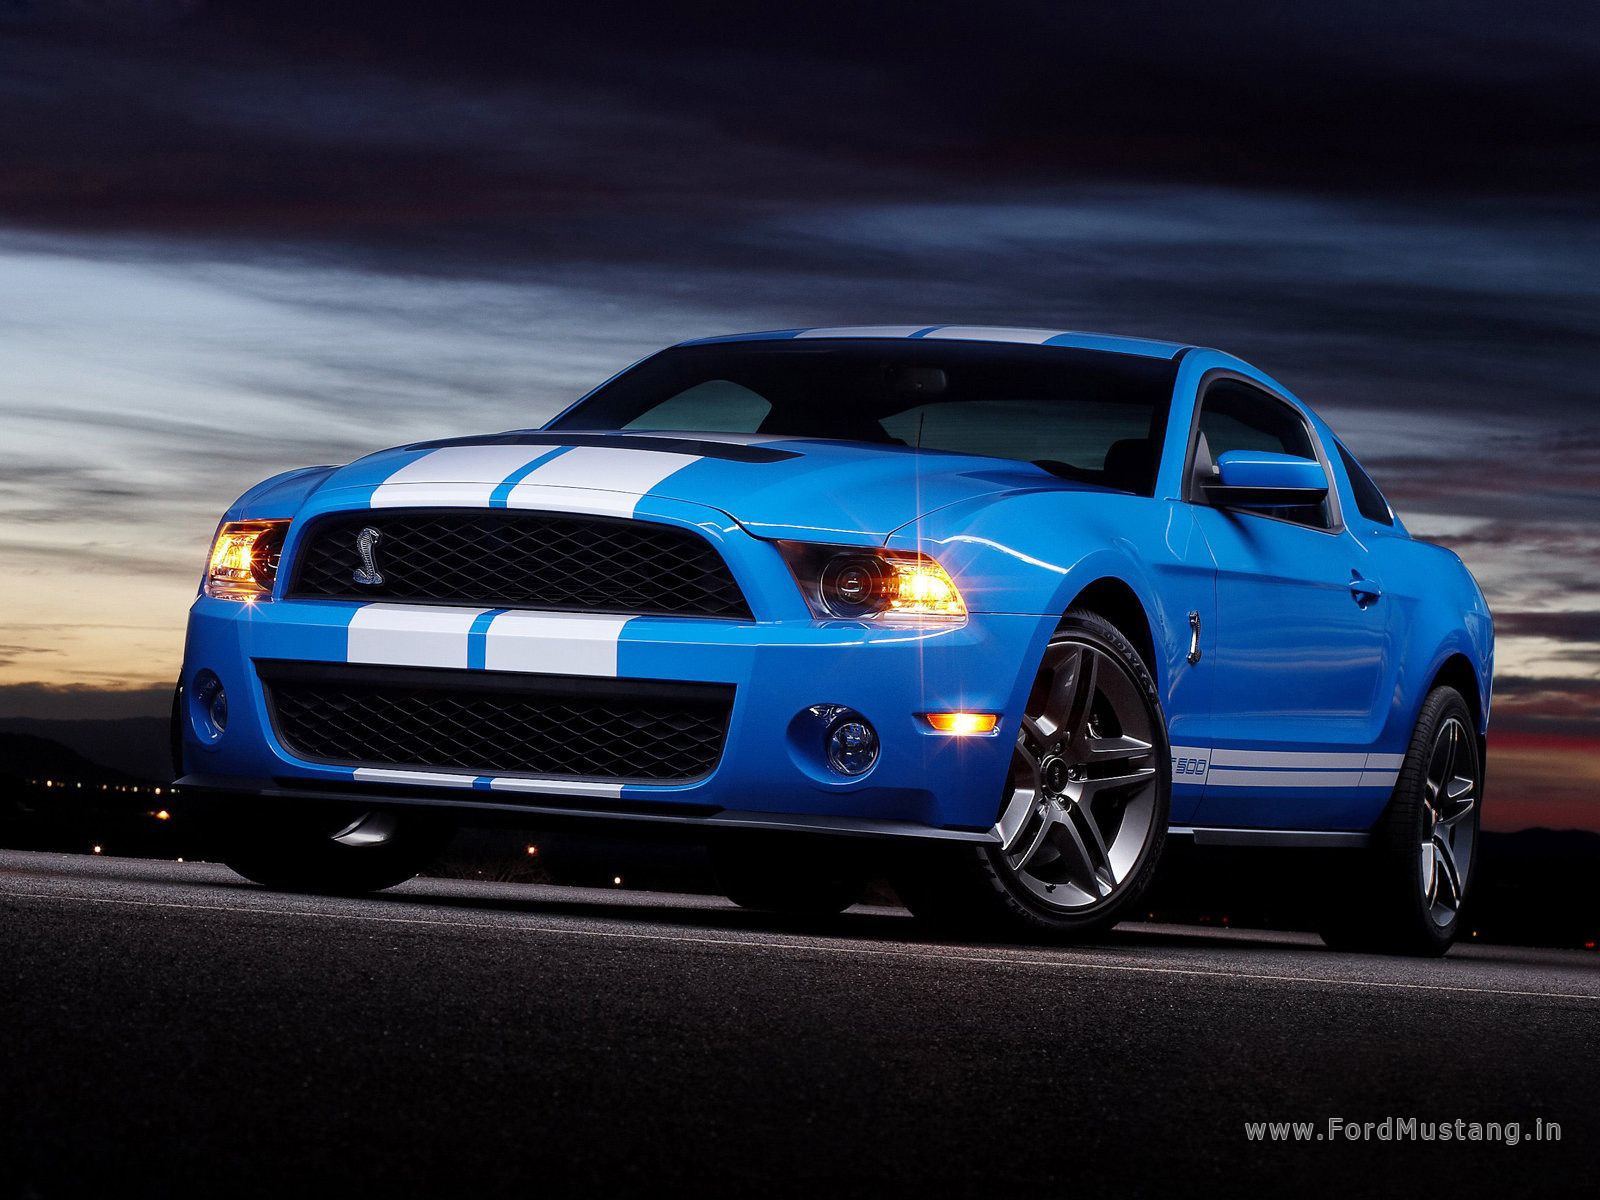 Mustang Shelby Gt500 Wallpaper Ford